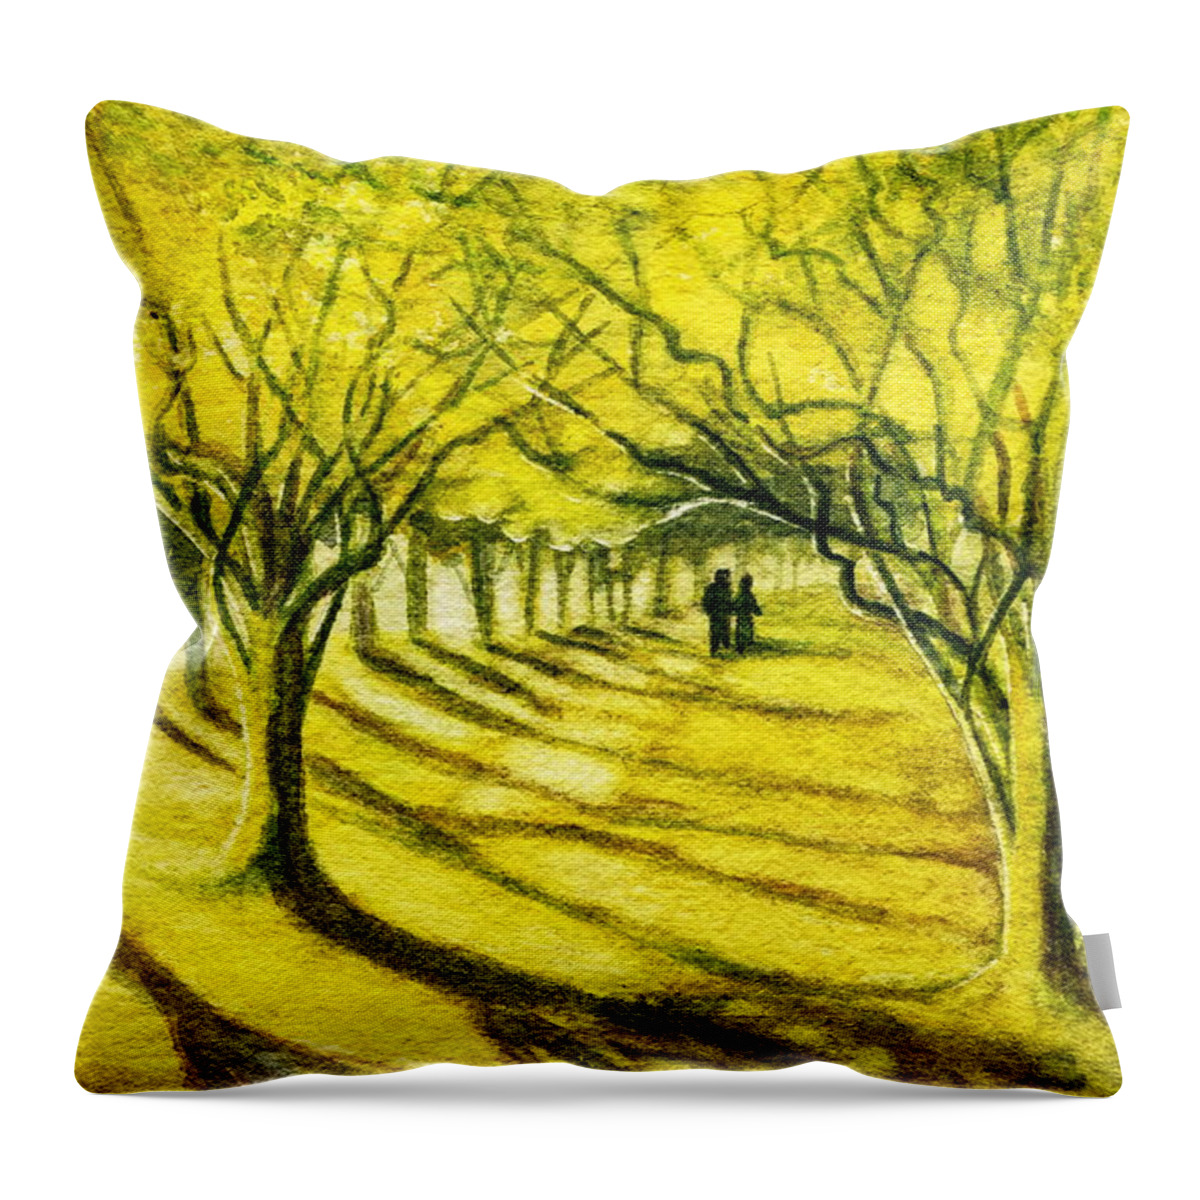 Palo Verde Trees Throw Pillow featuring the painting Palo Verde Pathway by Marilyn Smith